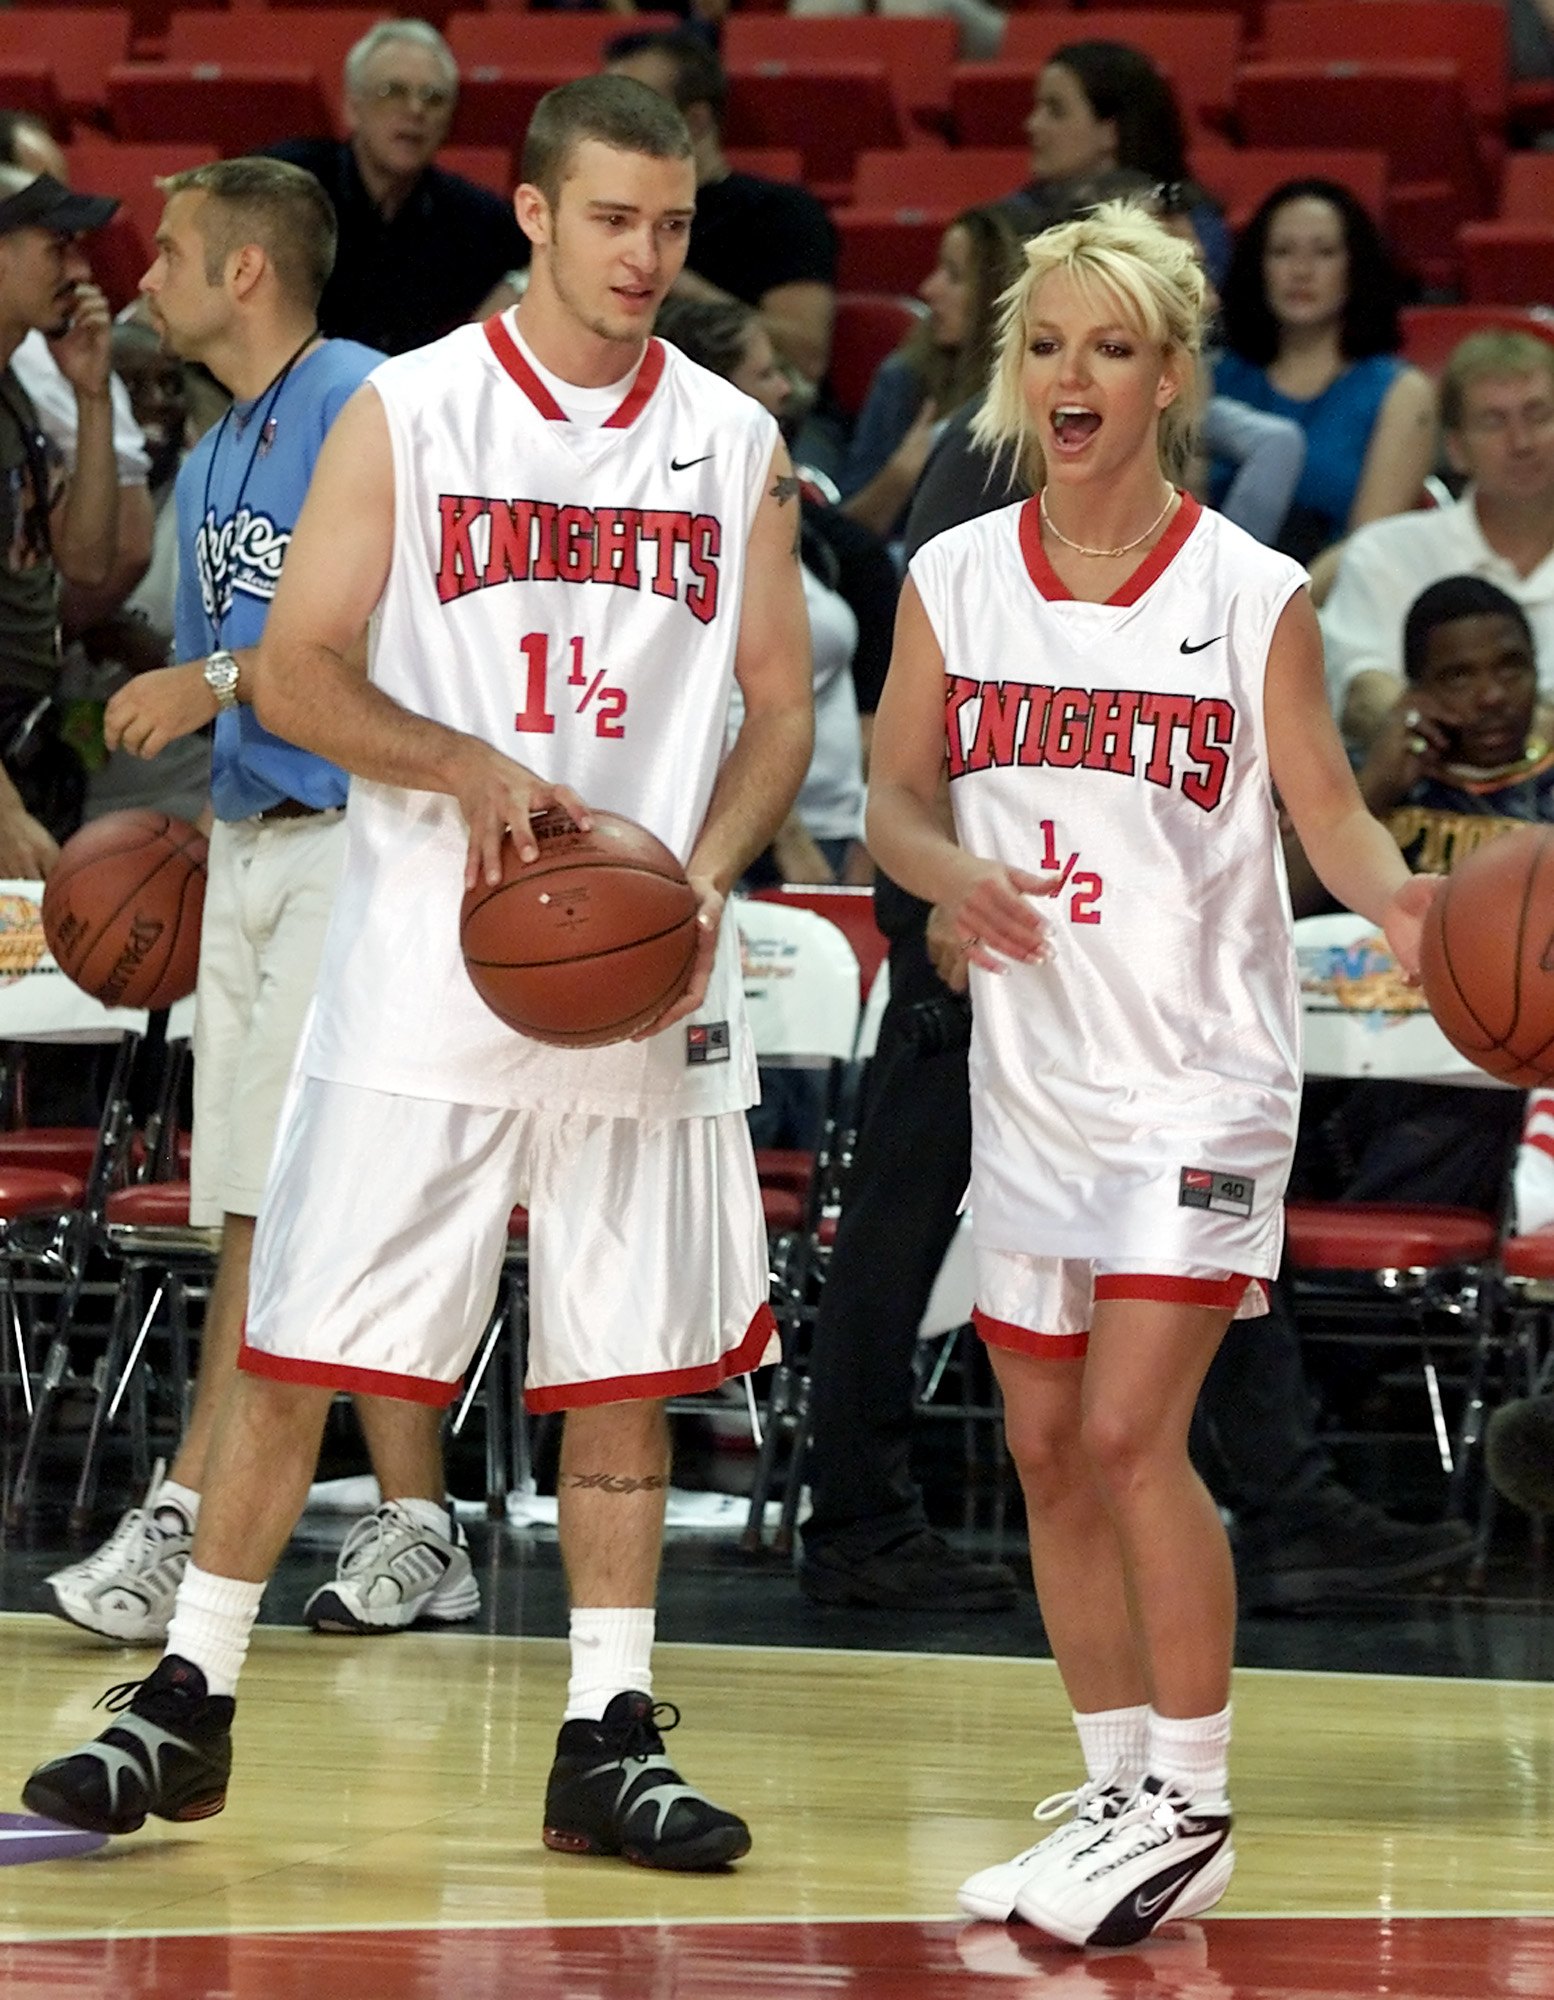 Britney Spears & Justin Timberlake at a celebrity basketball game in 2001